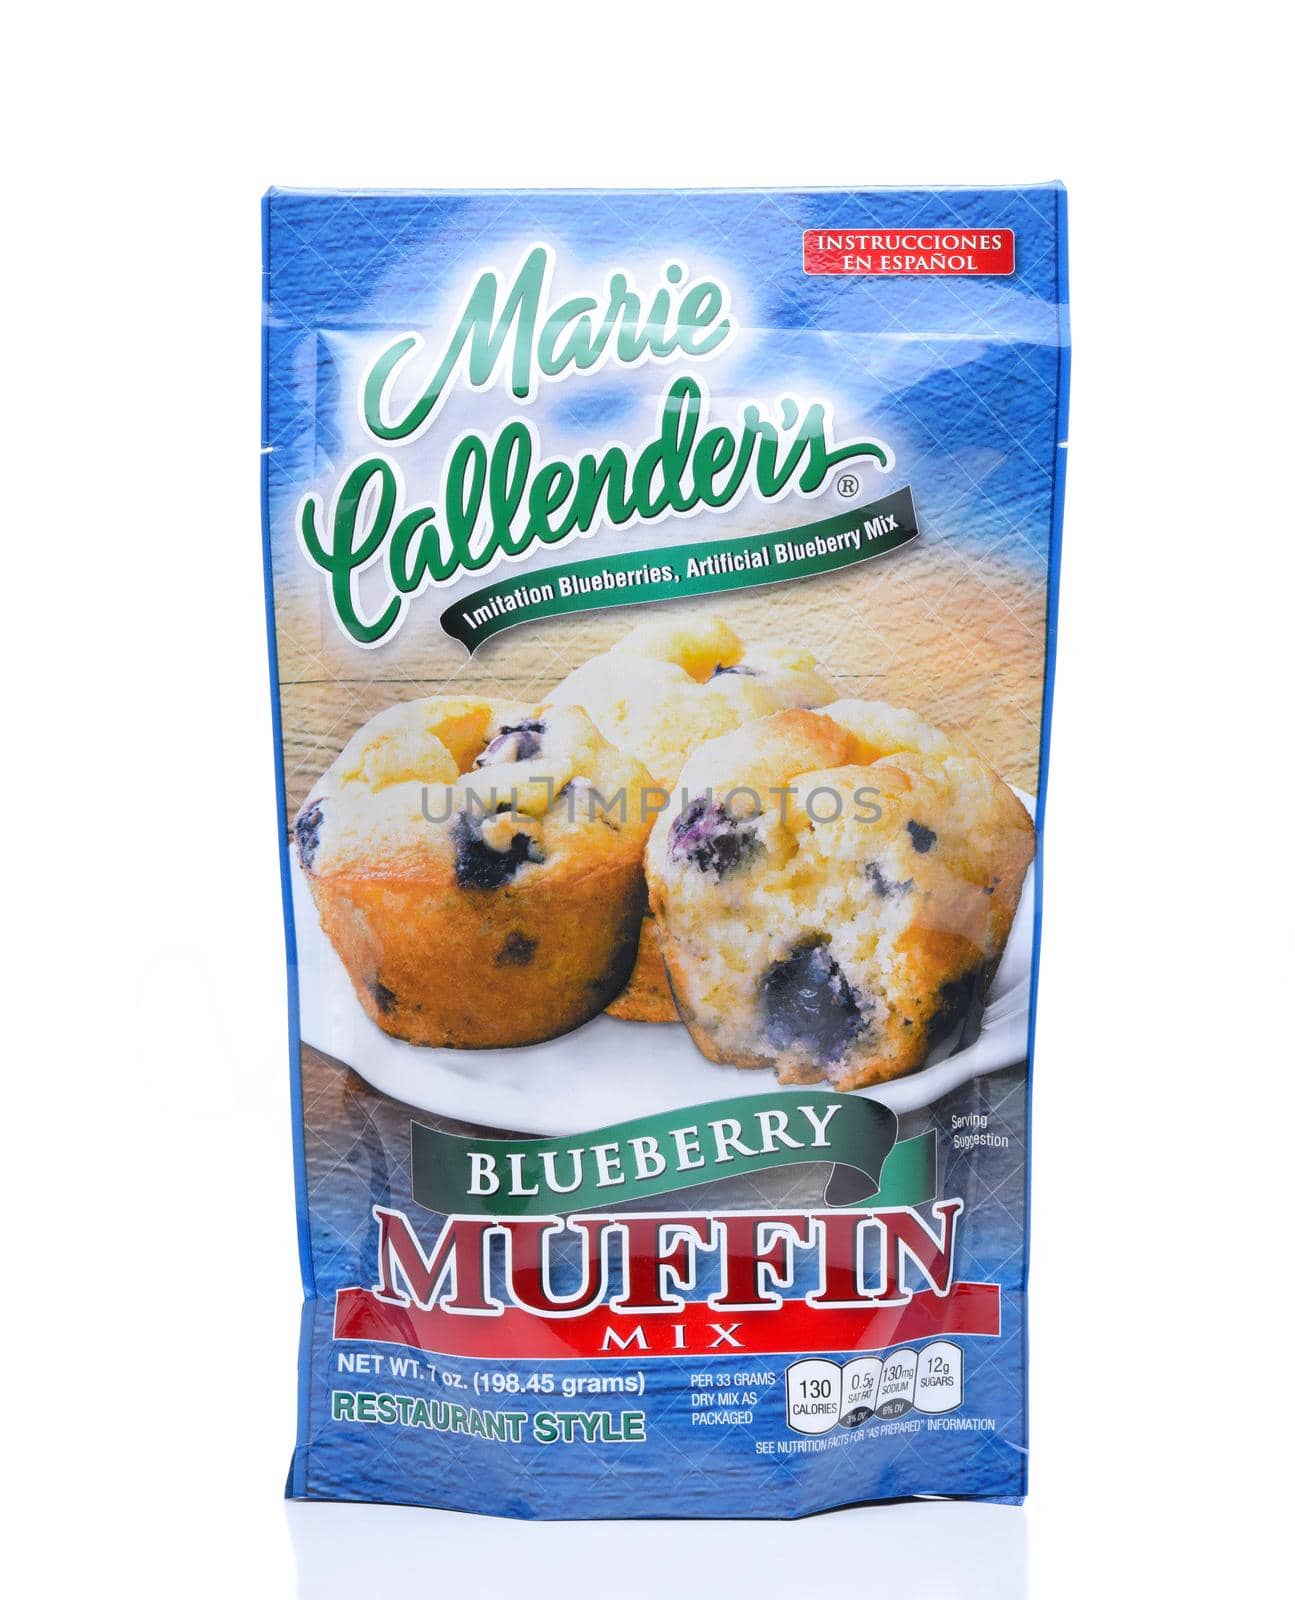  Marie Callenders Blueberry Muffin Mix by sCukrov